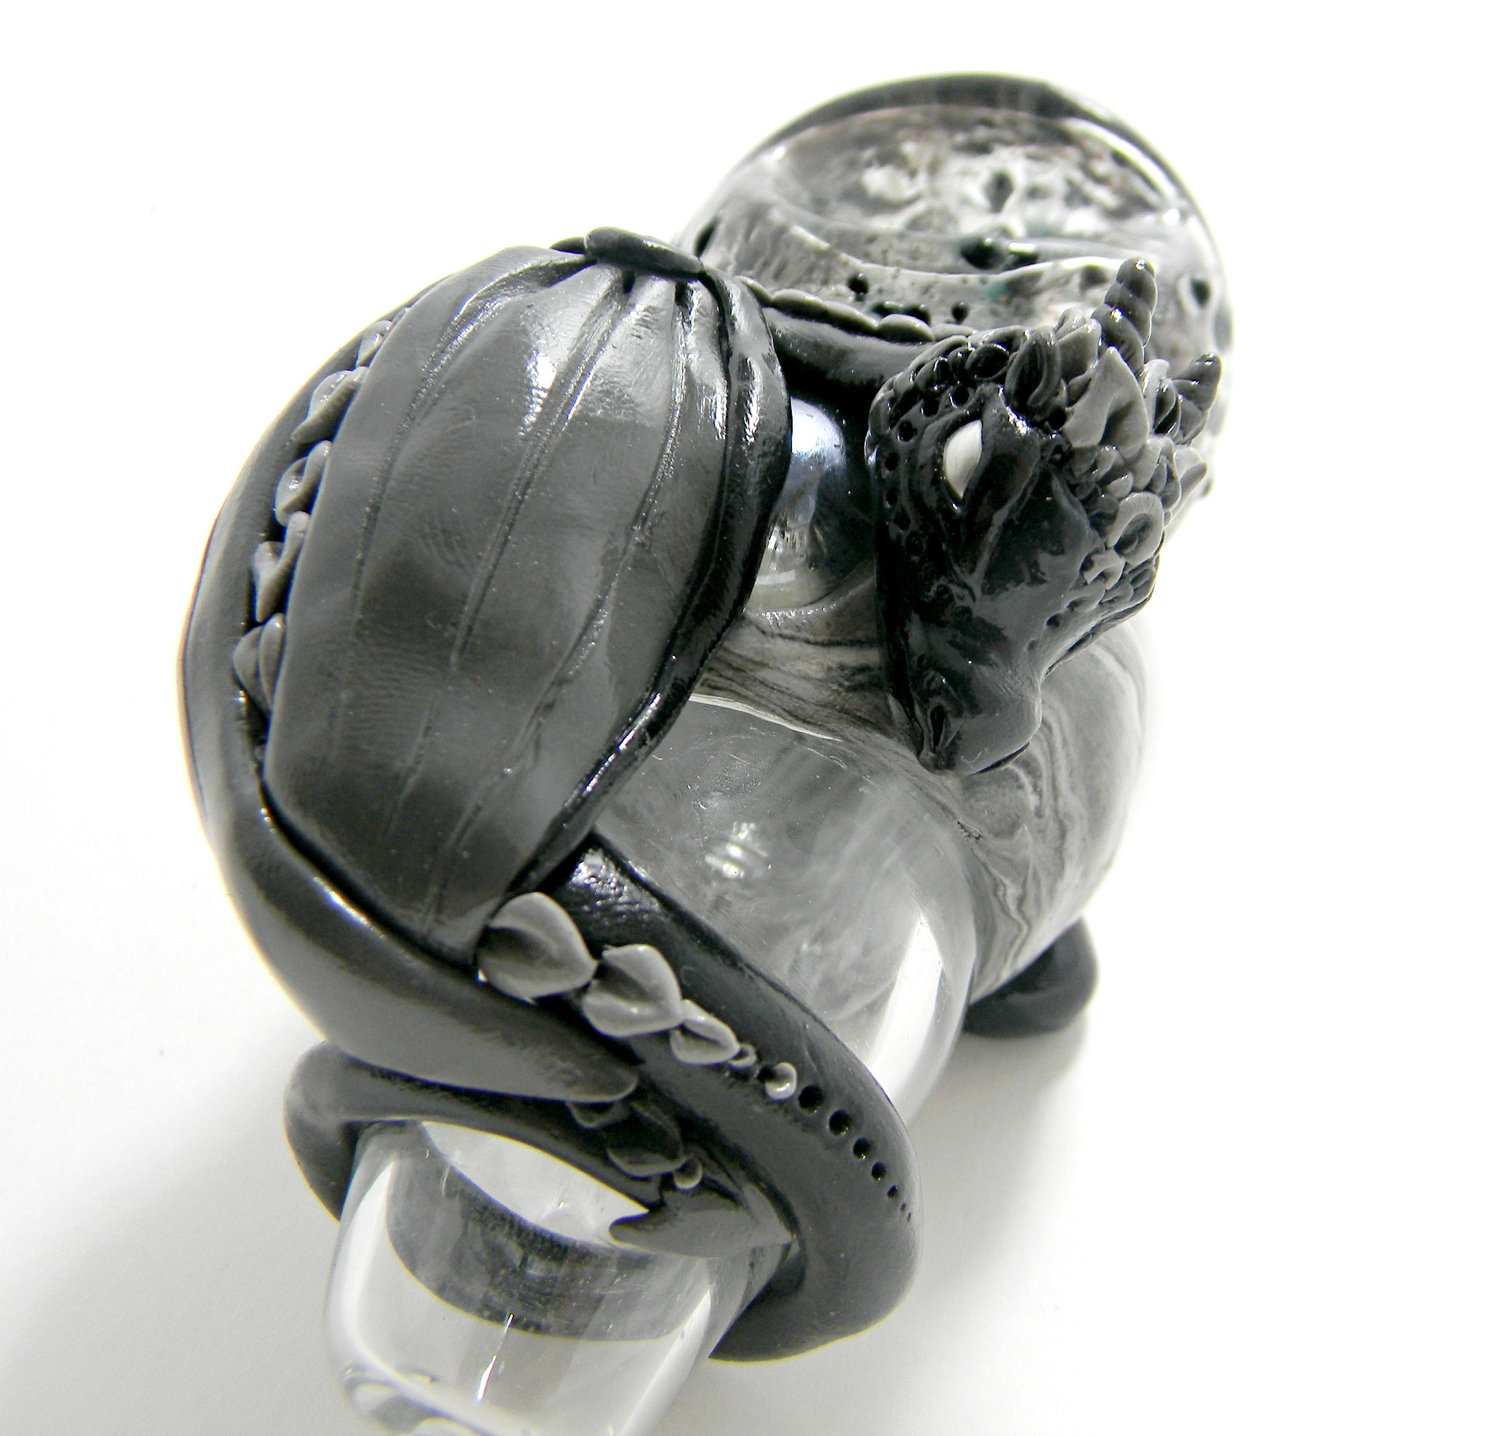 Piece-of-the-Week-Game-of-Thrones-Dragon-Glass-Pipe-Black-Dragon